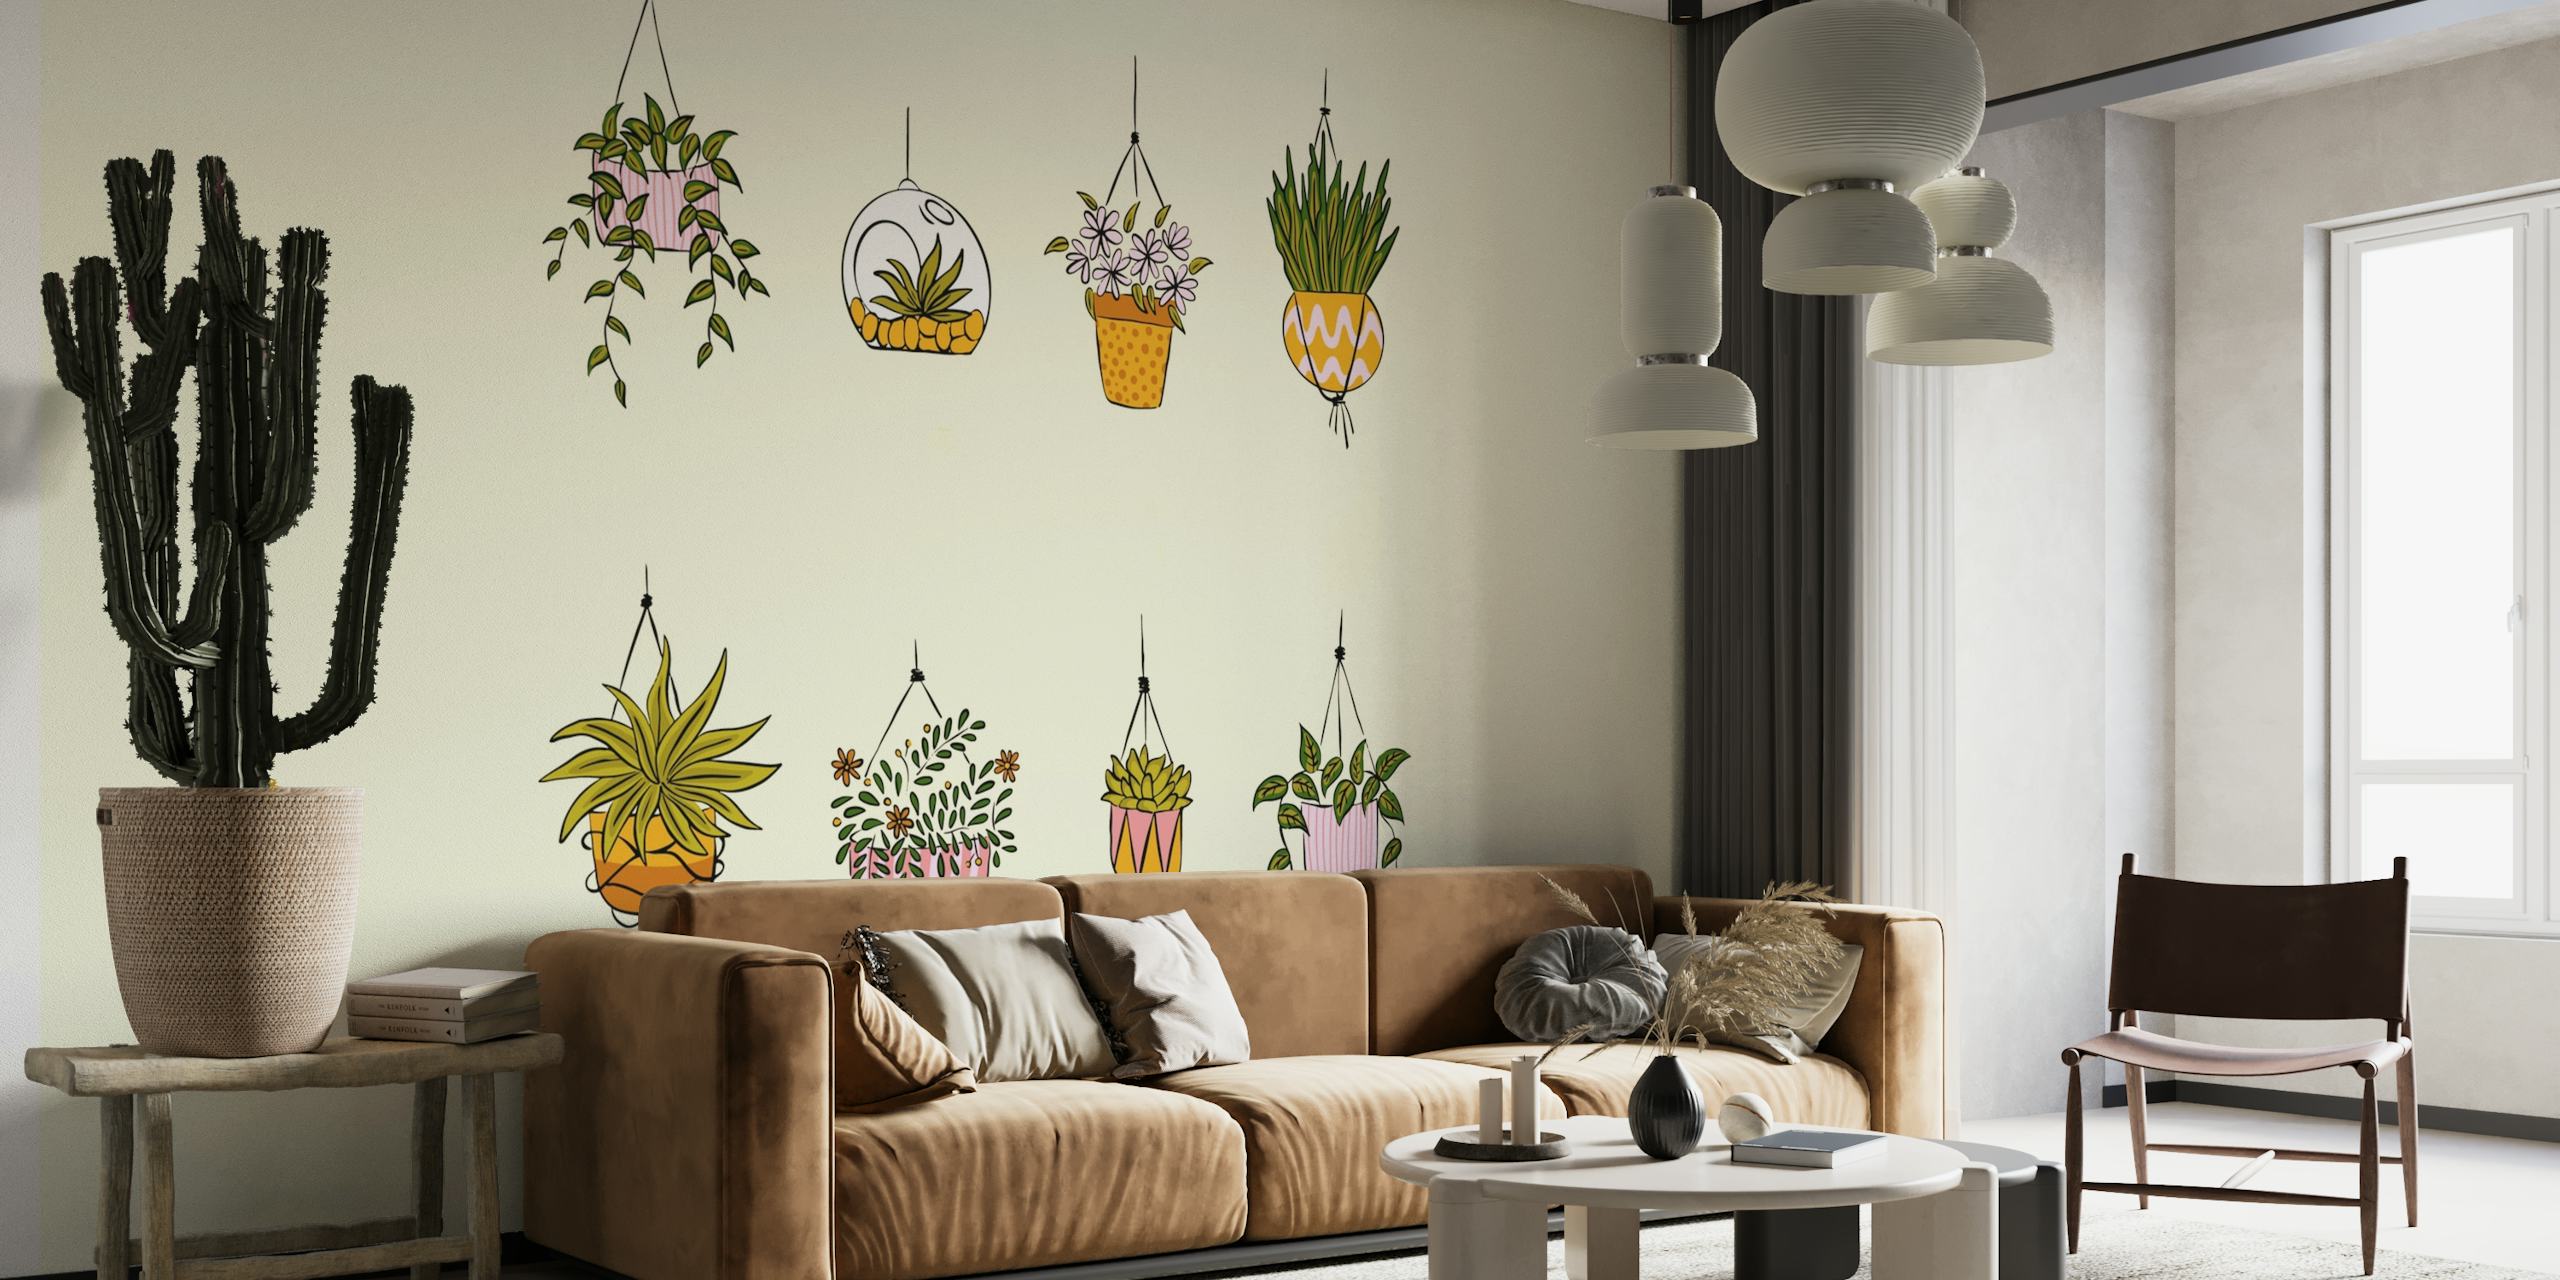 Potted Plant Wall behang